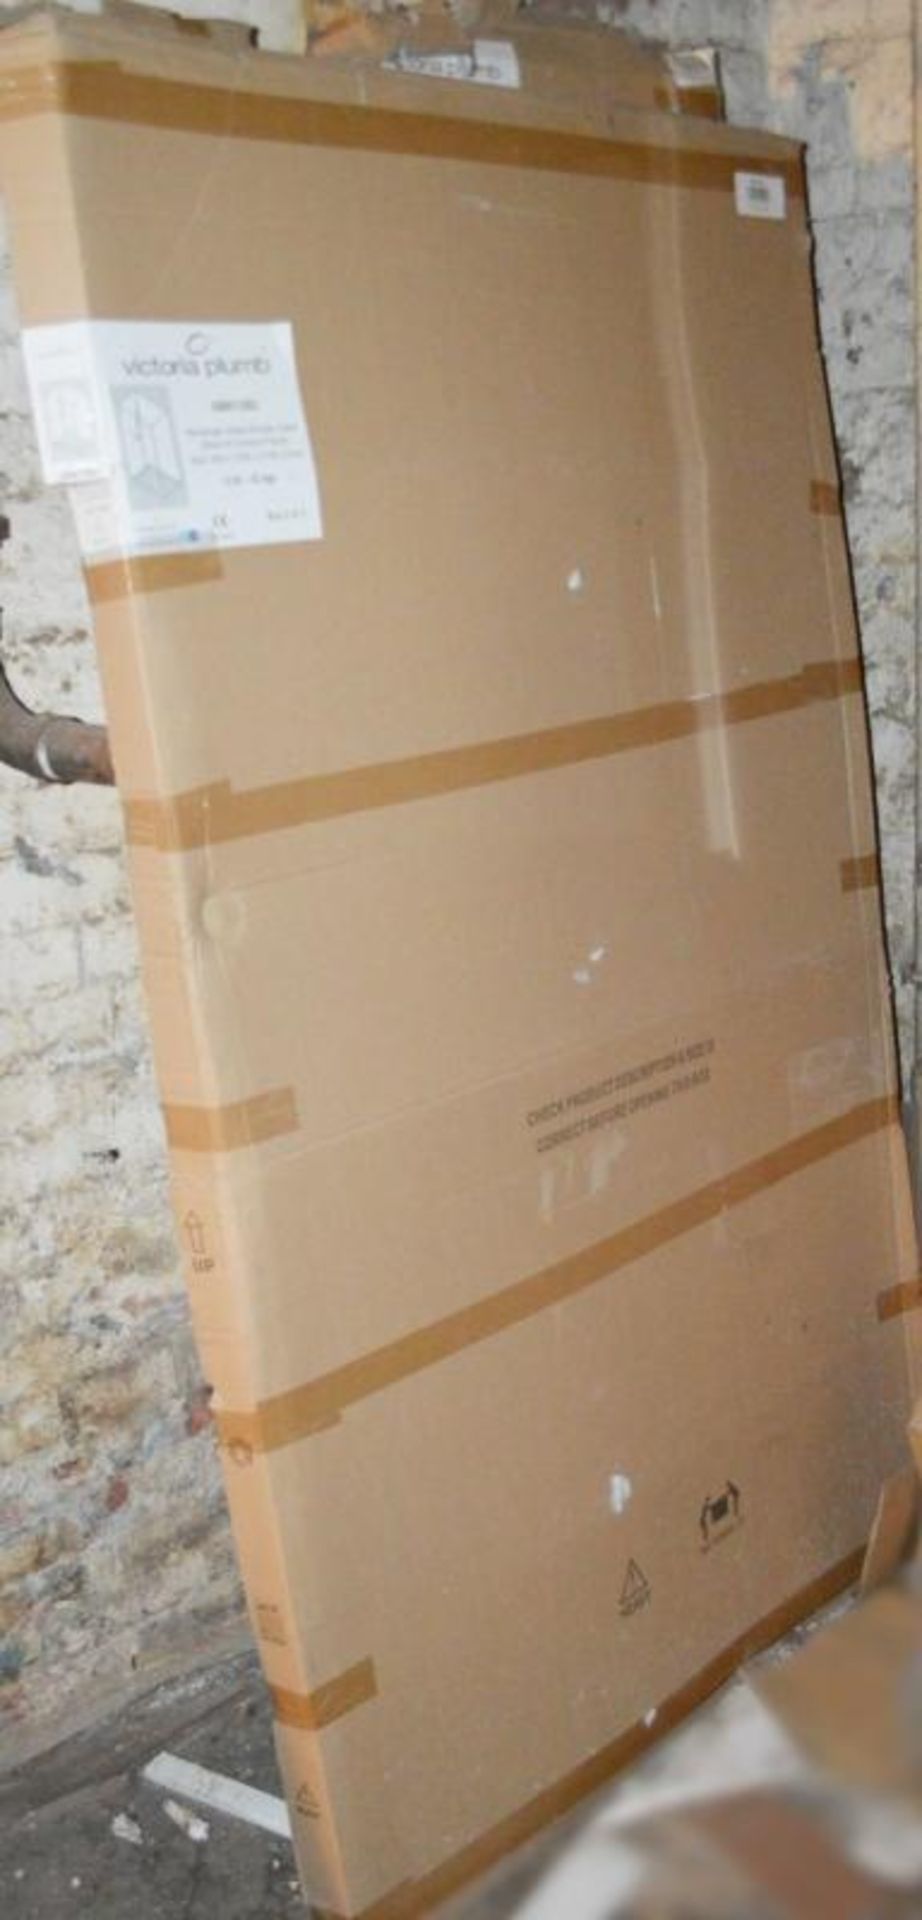 13 x Assorted Shower Screens And Panels - RefMT787 + Ref731 - New / Unused Boxed Stock - CL269 - Loc - Image 7 of 9